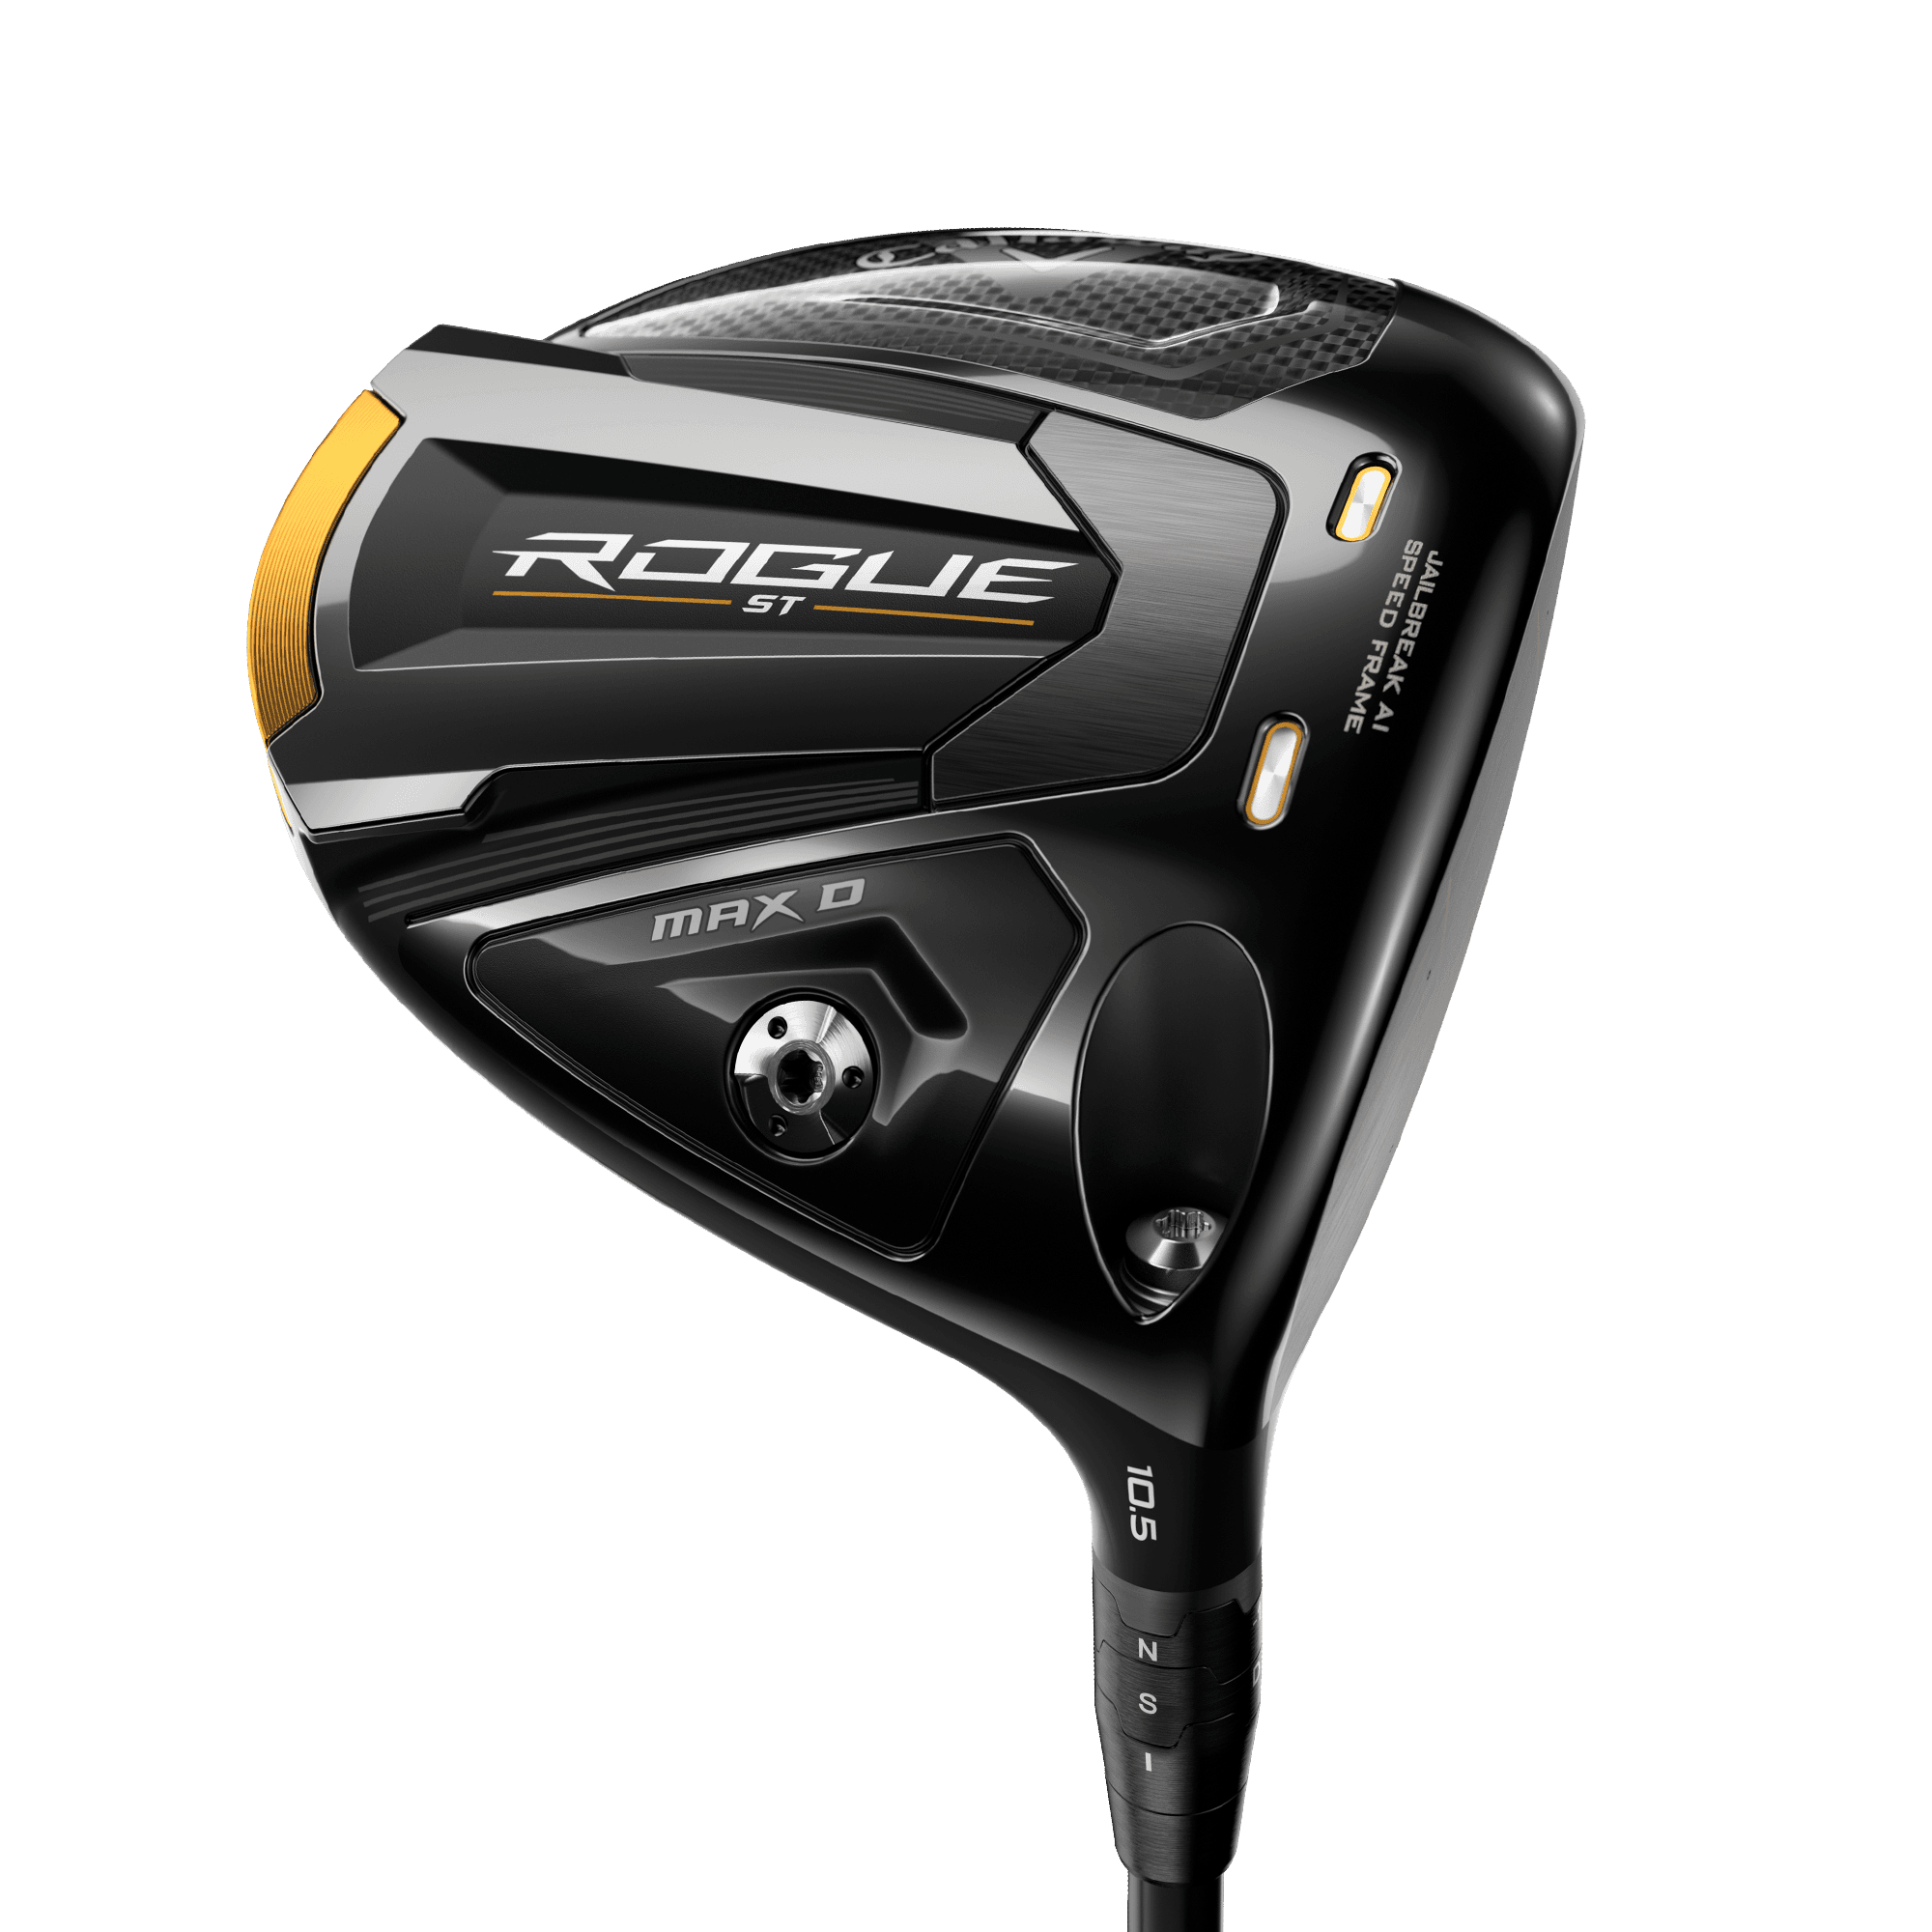 callaway x hot driver and free hybrid